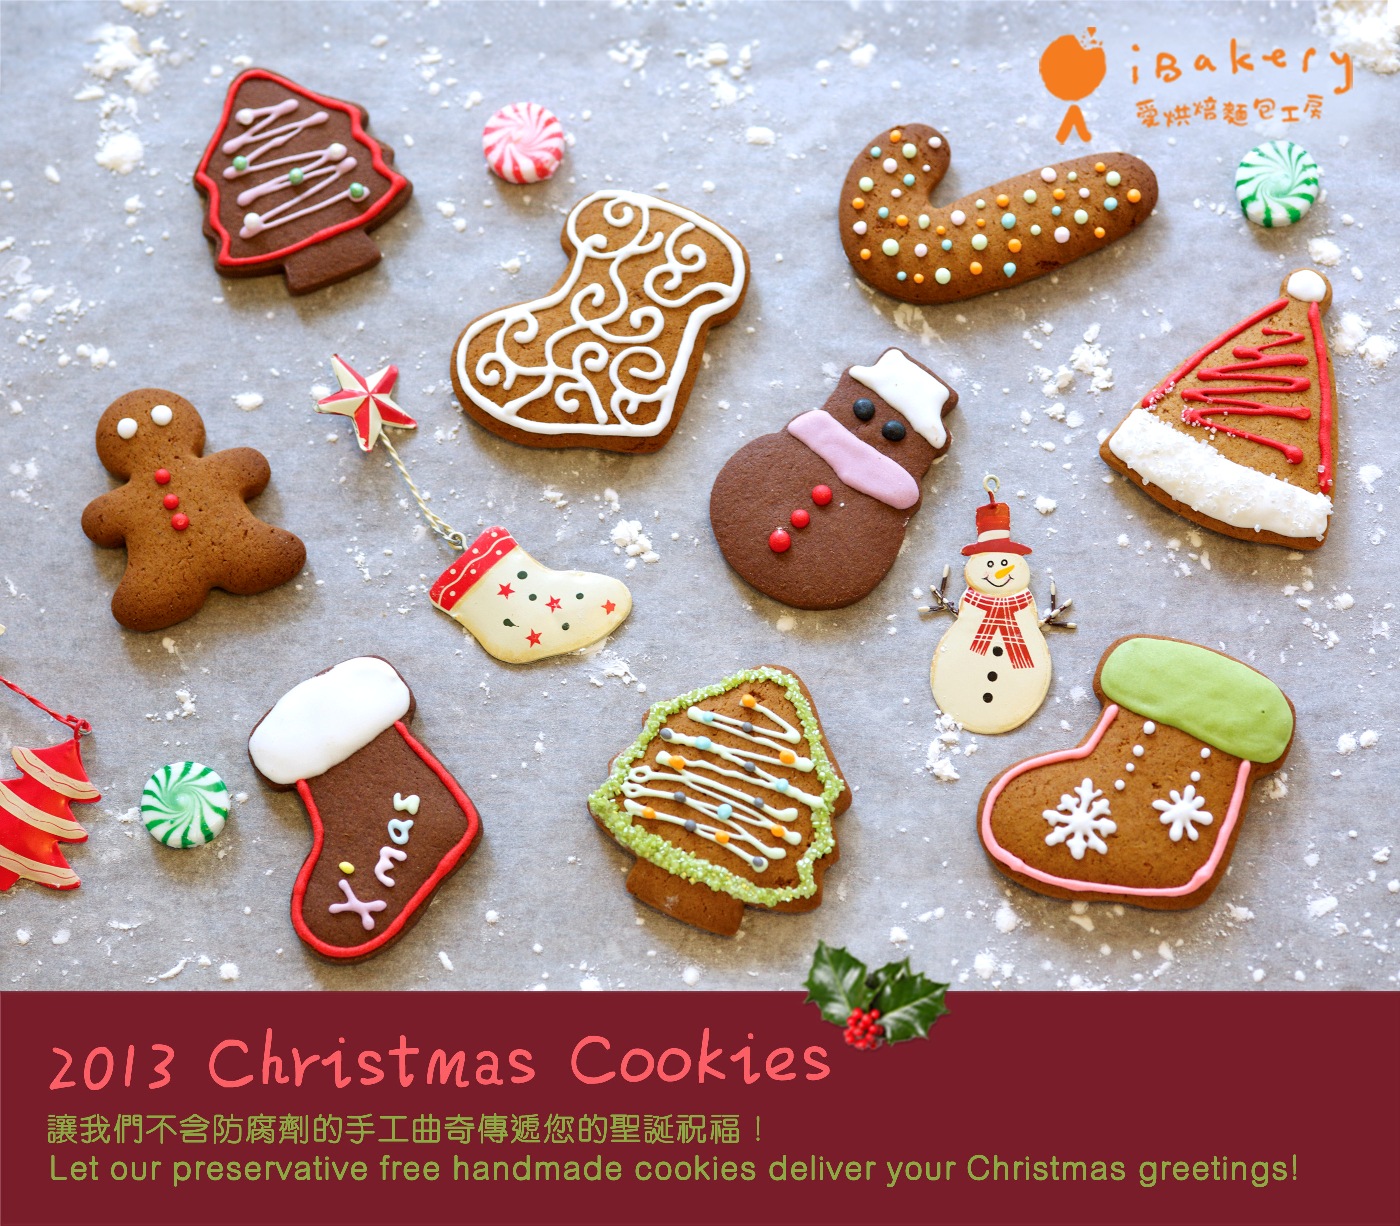 Let’s Christmas – Cookies Delight